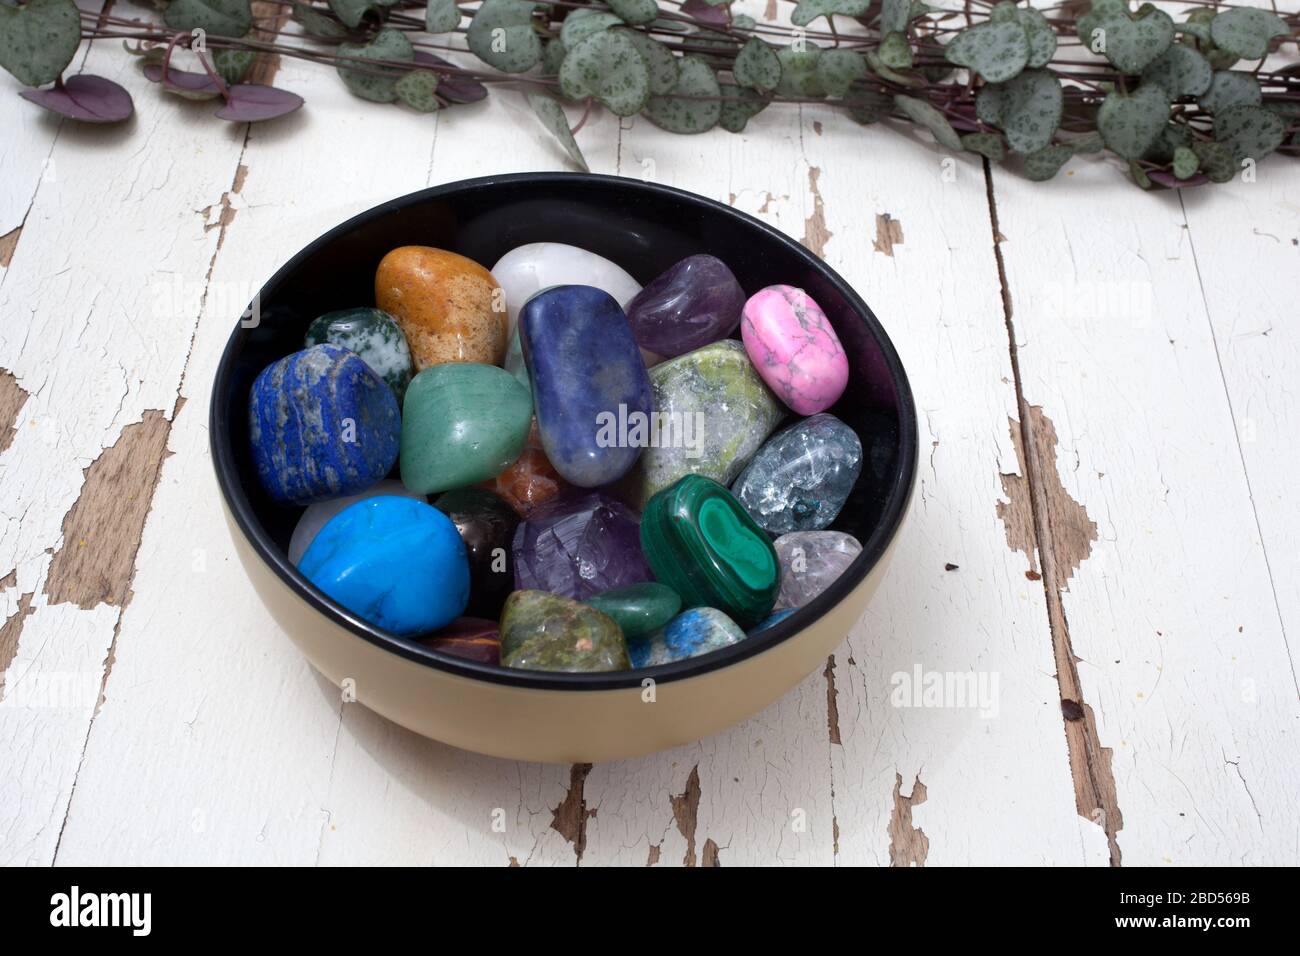 A bowl of assorted gemstones photographed against a white rustic surface Stock Photo